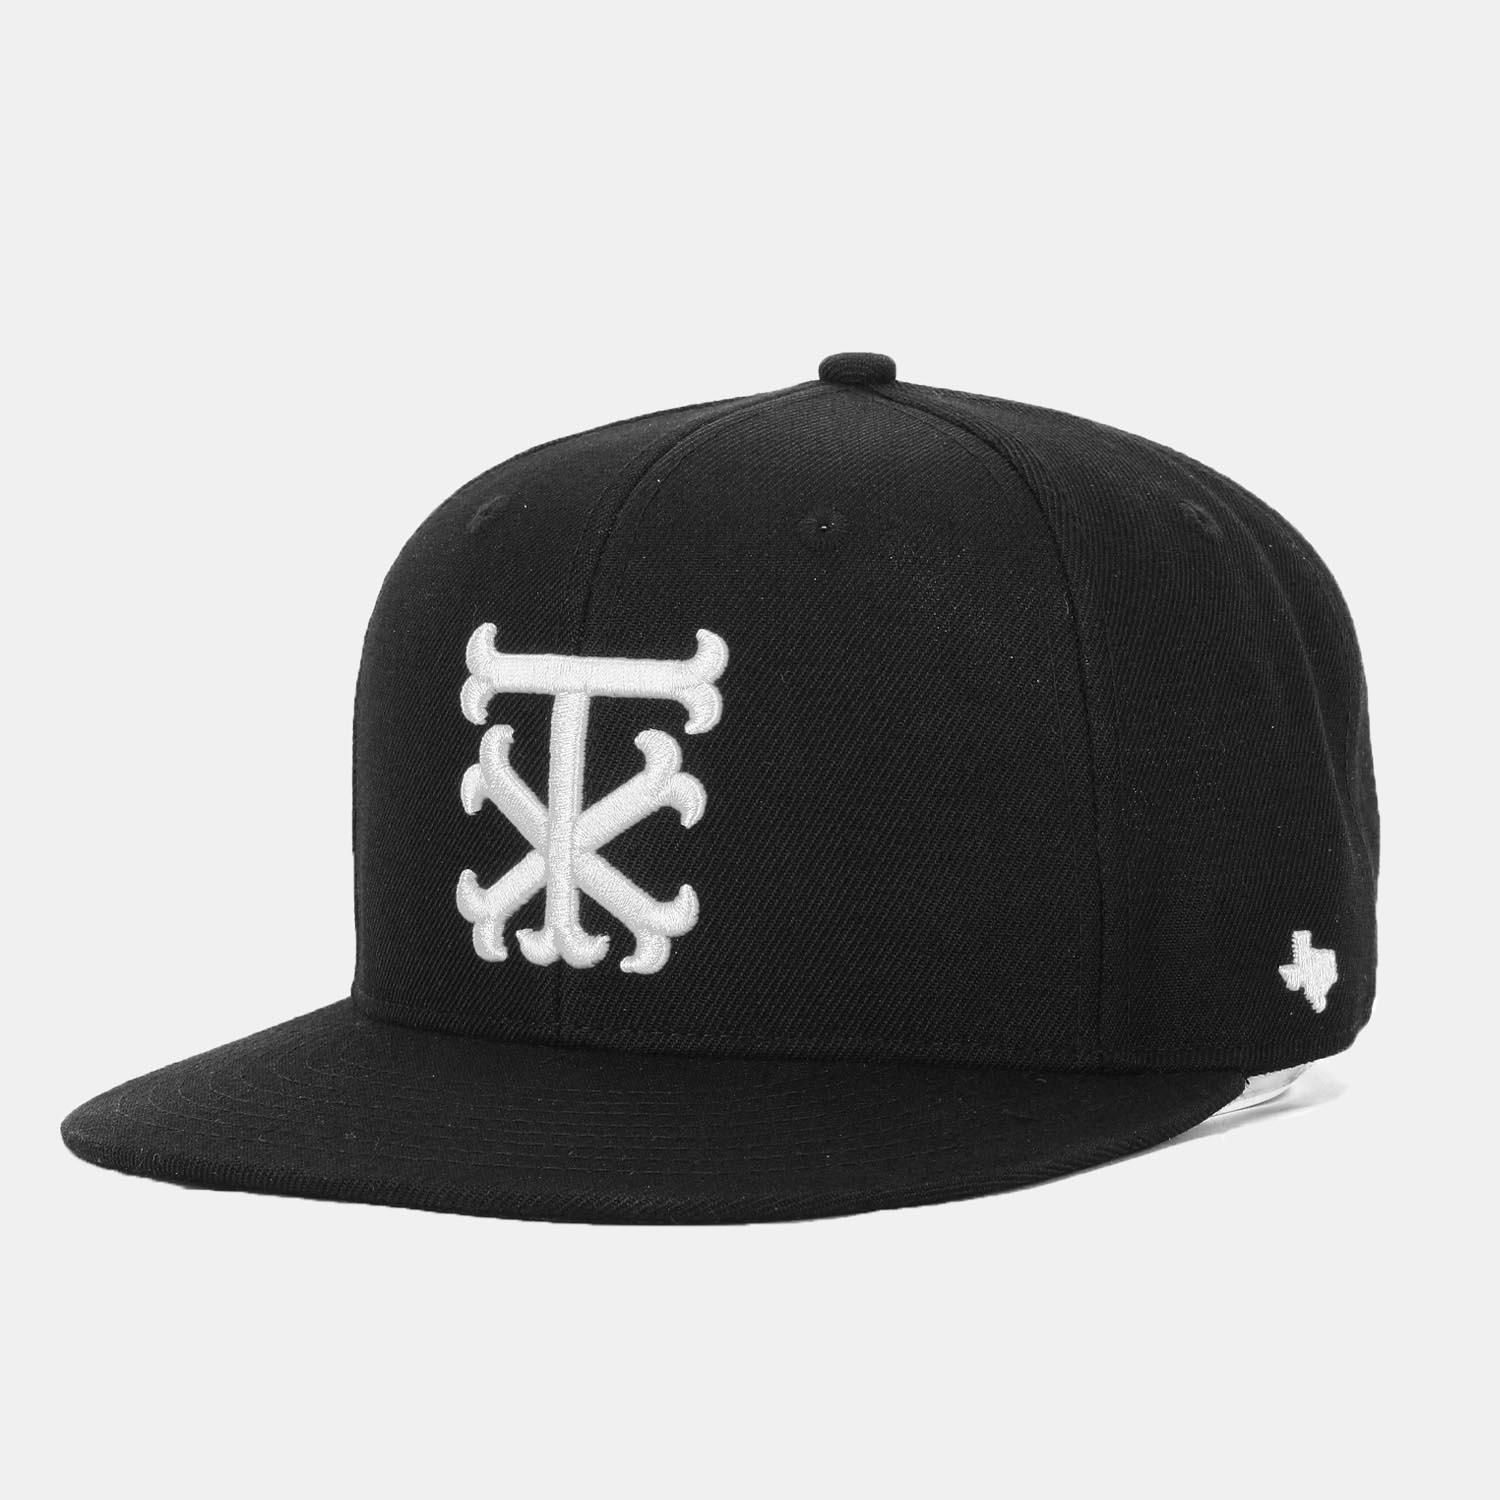 Txers, Txers Gear, Ruthless, Texas hat, TX hat, Texas, New era, Snapback, Texas, Texas hat, Snapback hat, Facebook, Purchase, Add to cart, 59fifty